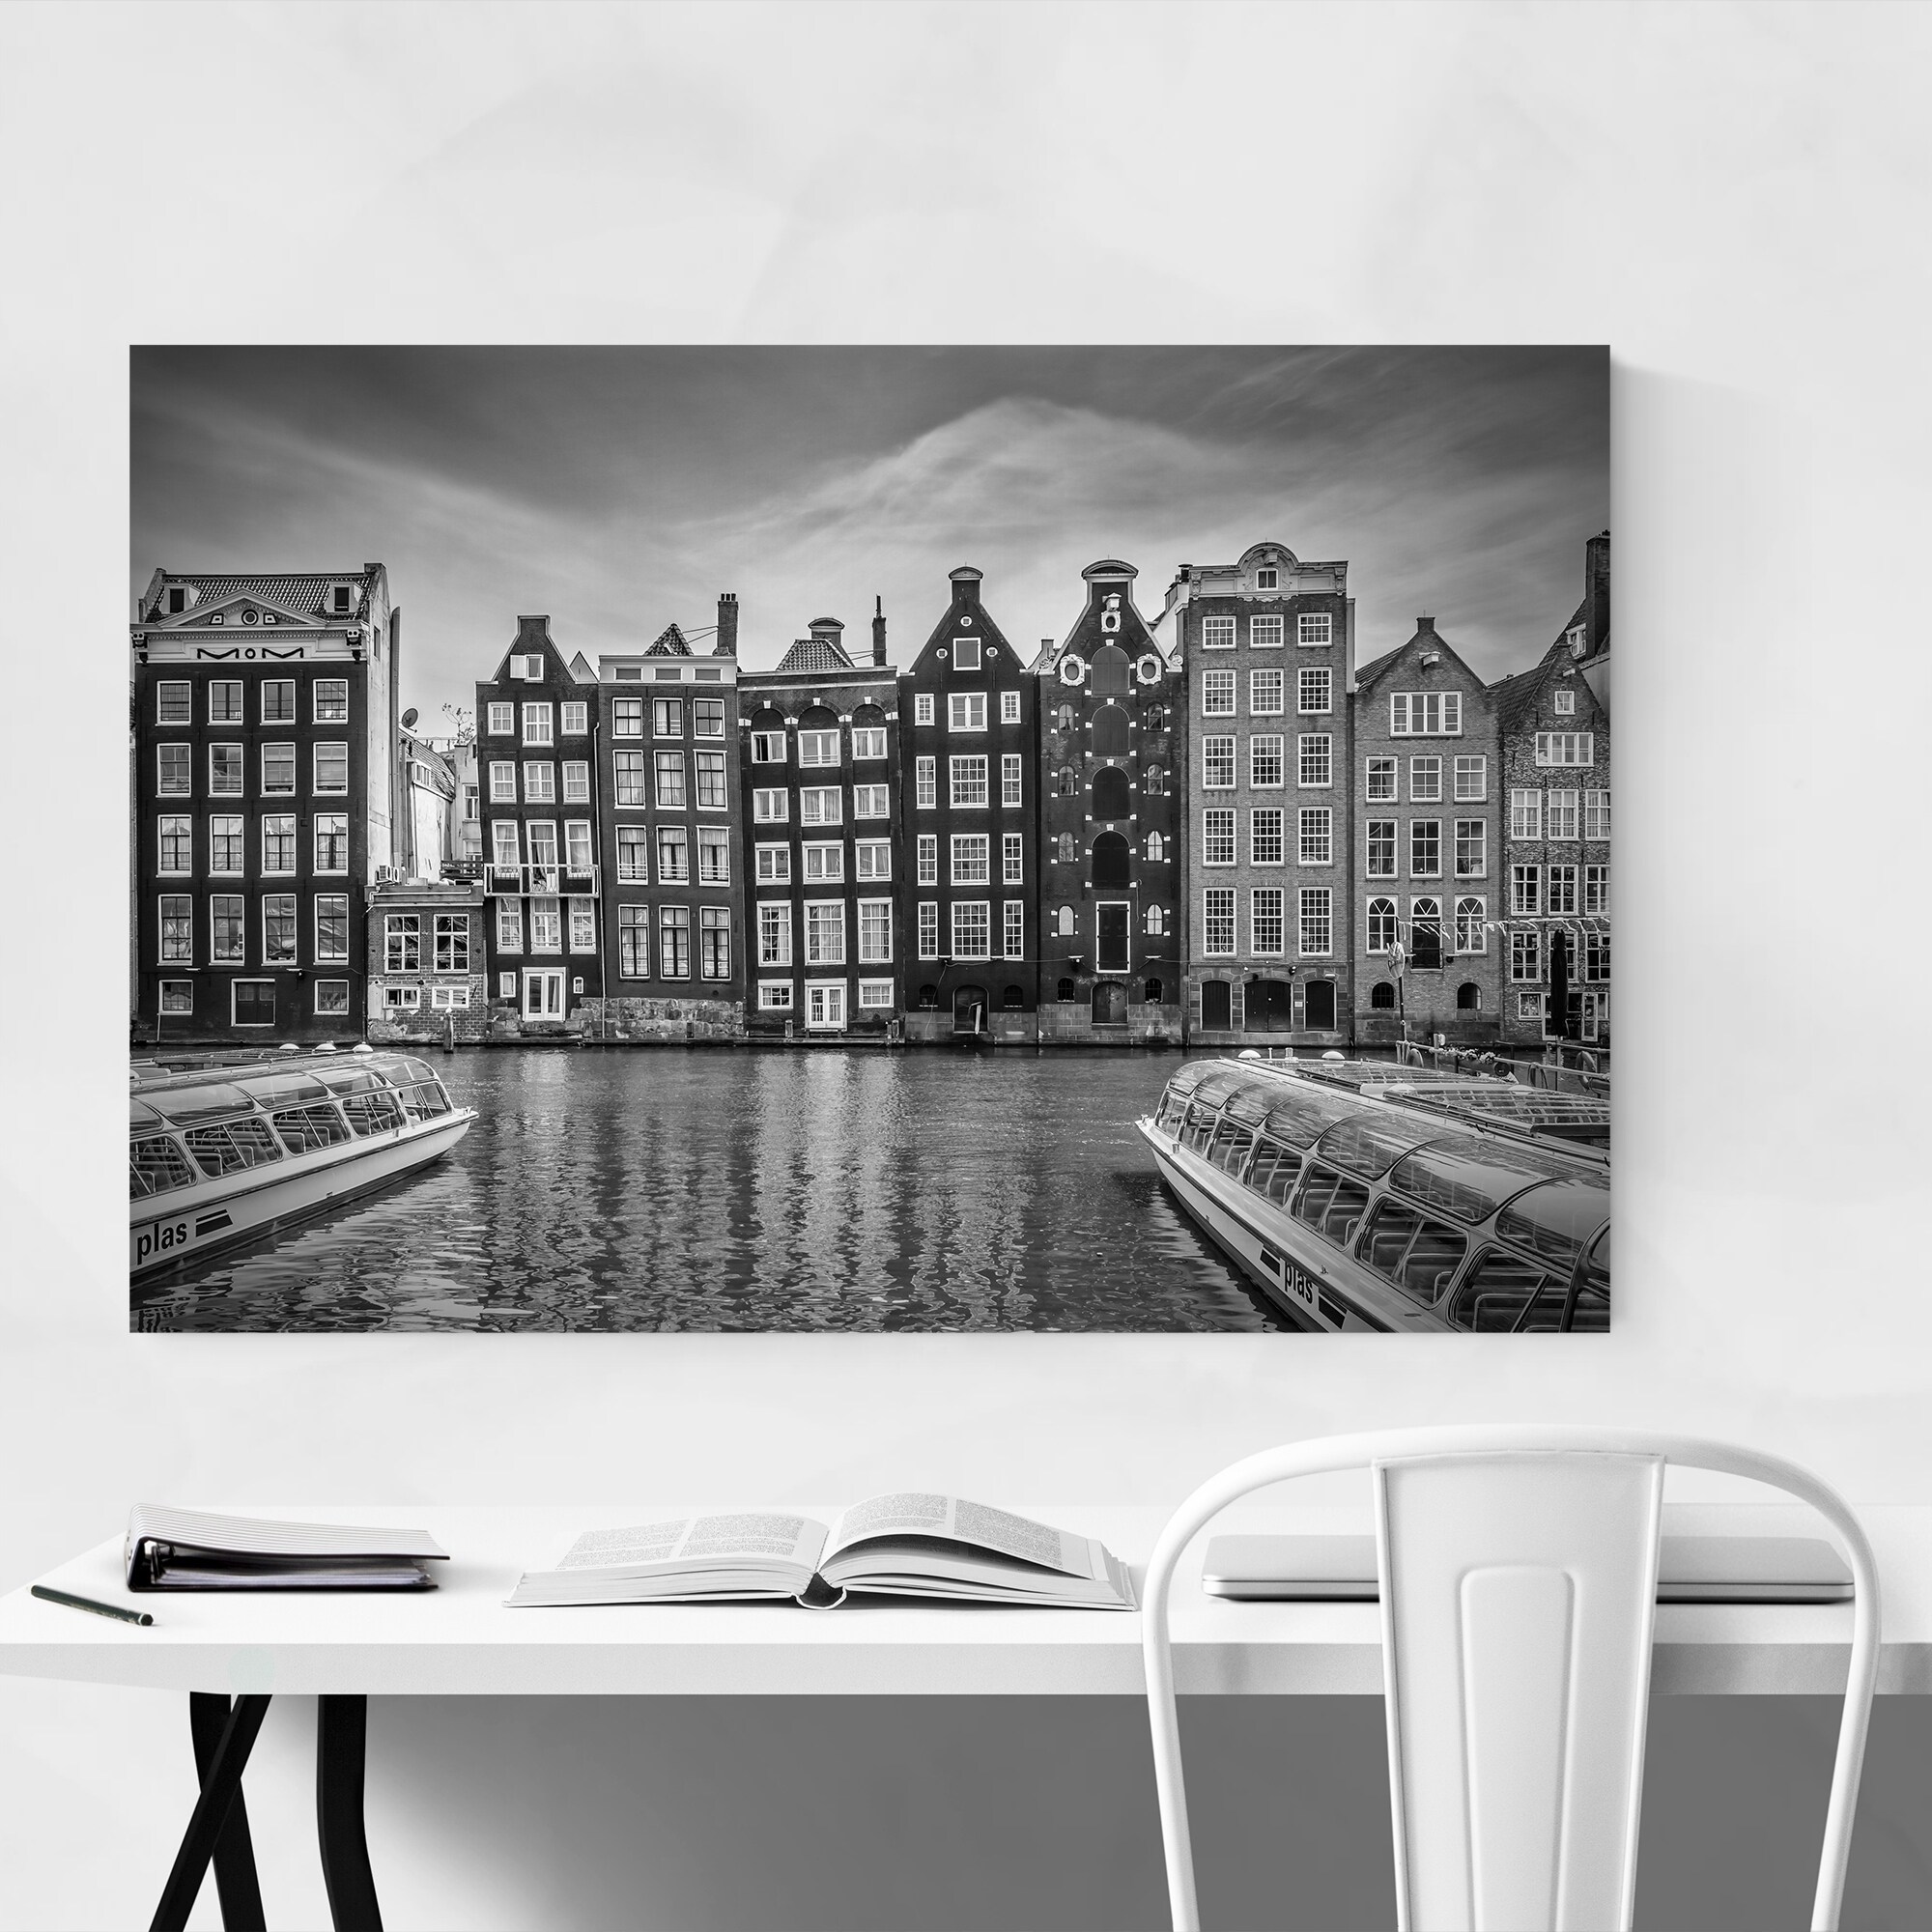 13+ Most Amsterdam wall art images info